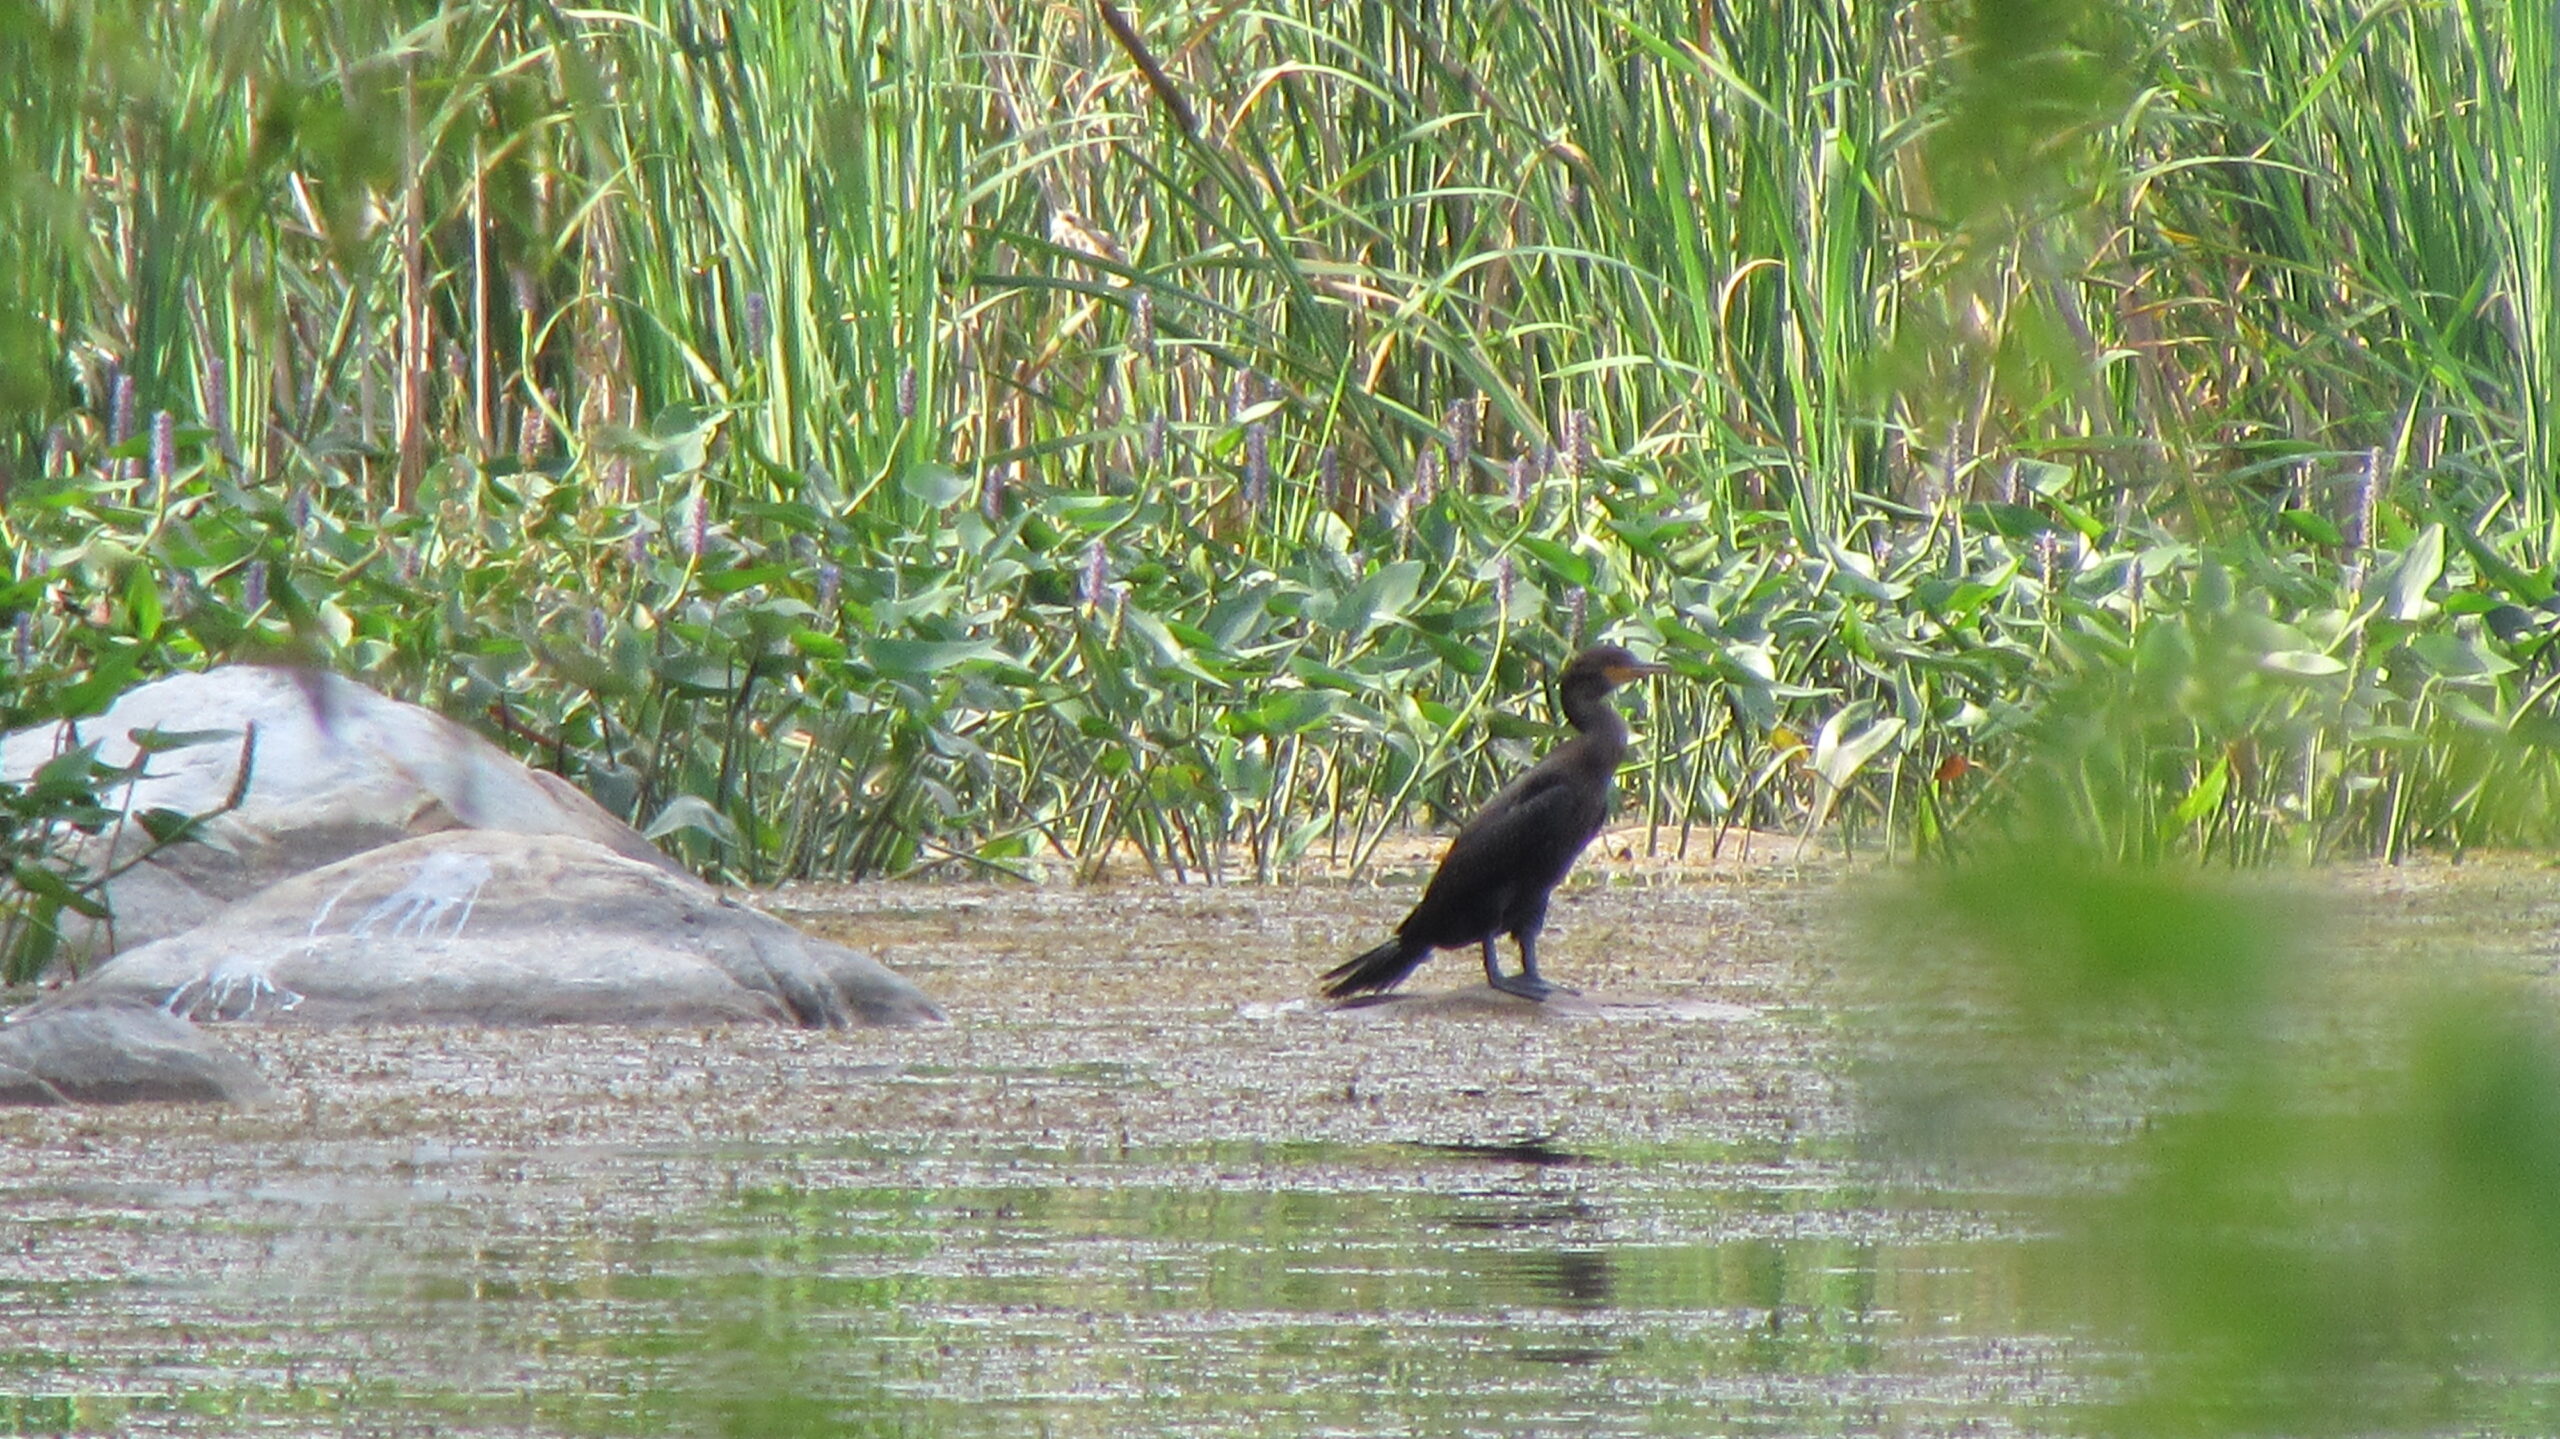 A Double-crested Cormorant wading in a swamp.